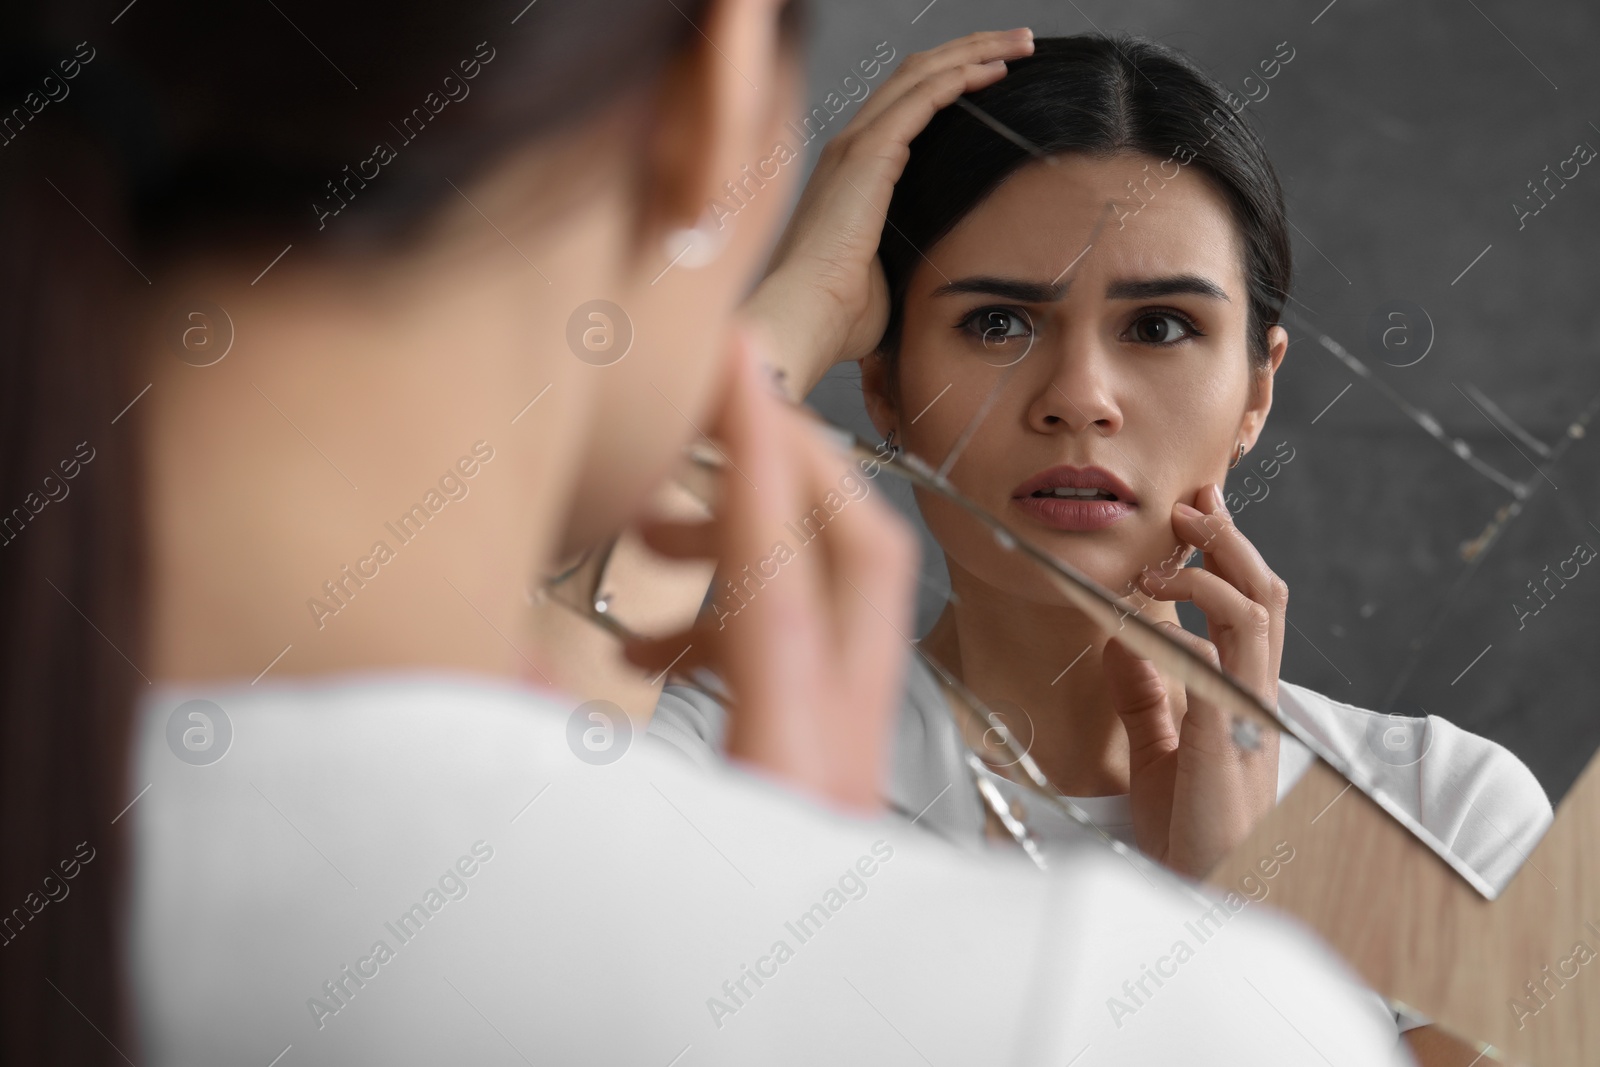 Photo of Young woman suffering from mental problems near broken mirror indoors